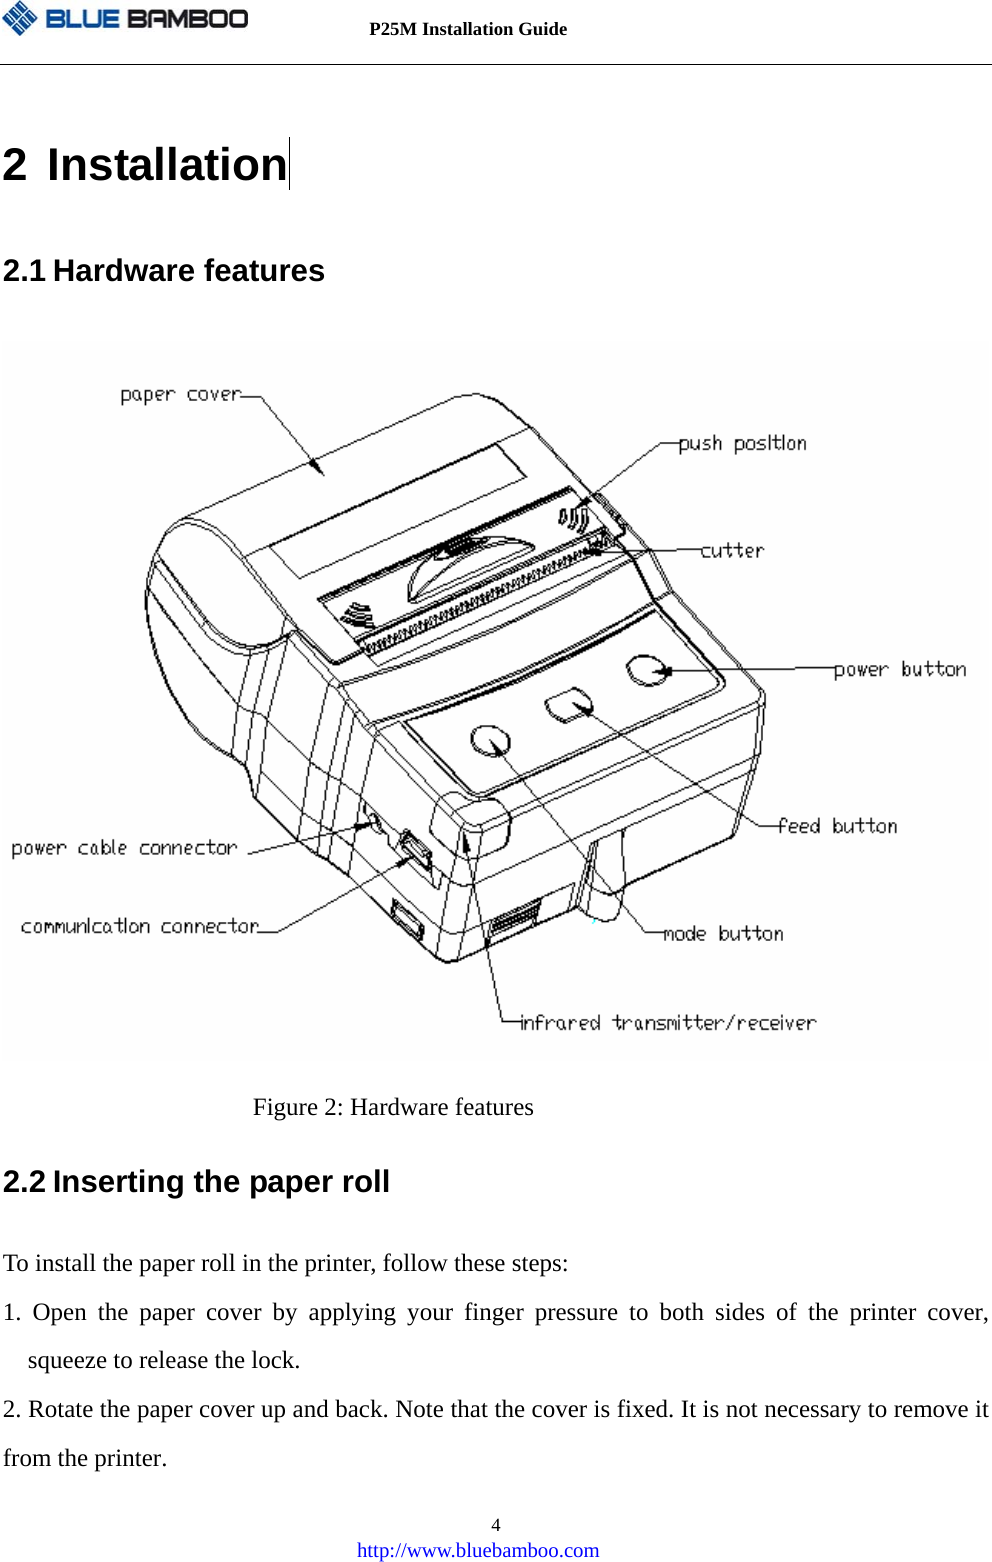          P25M Installation Guide   http://www.bluebamboo.com 42 Installation  2.1 Hardware features  Figure 2: Hardware features 2.2 Inserting the paper roll To install the paper roll in the printer, follow these steps: 1. Open the paper cover by applying your finger pressure to both sides of the printer cover, squeeze to release the lock. 2. Rotate the paper cover up and back. Note that the cover is fixed. It is not necessary to remove it from the printer. 